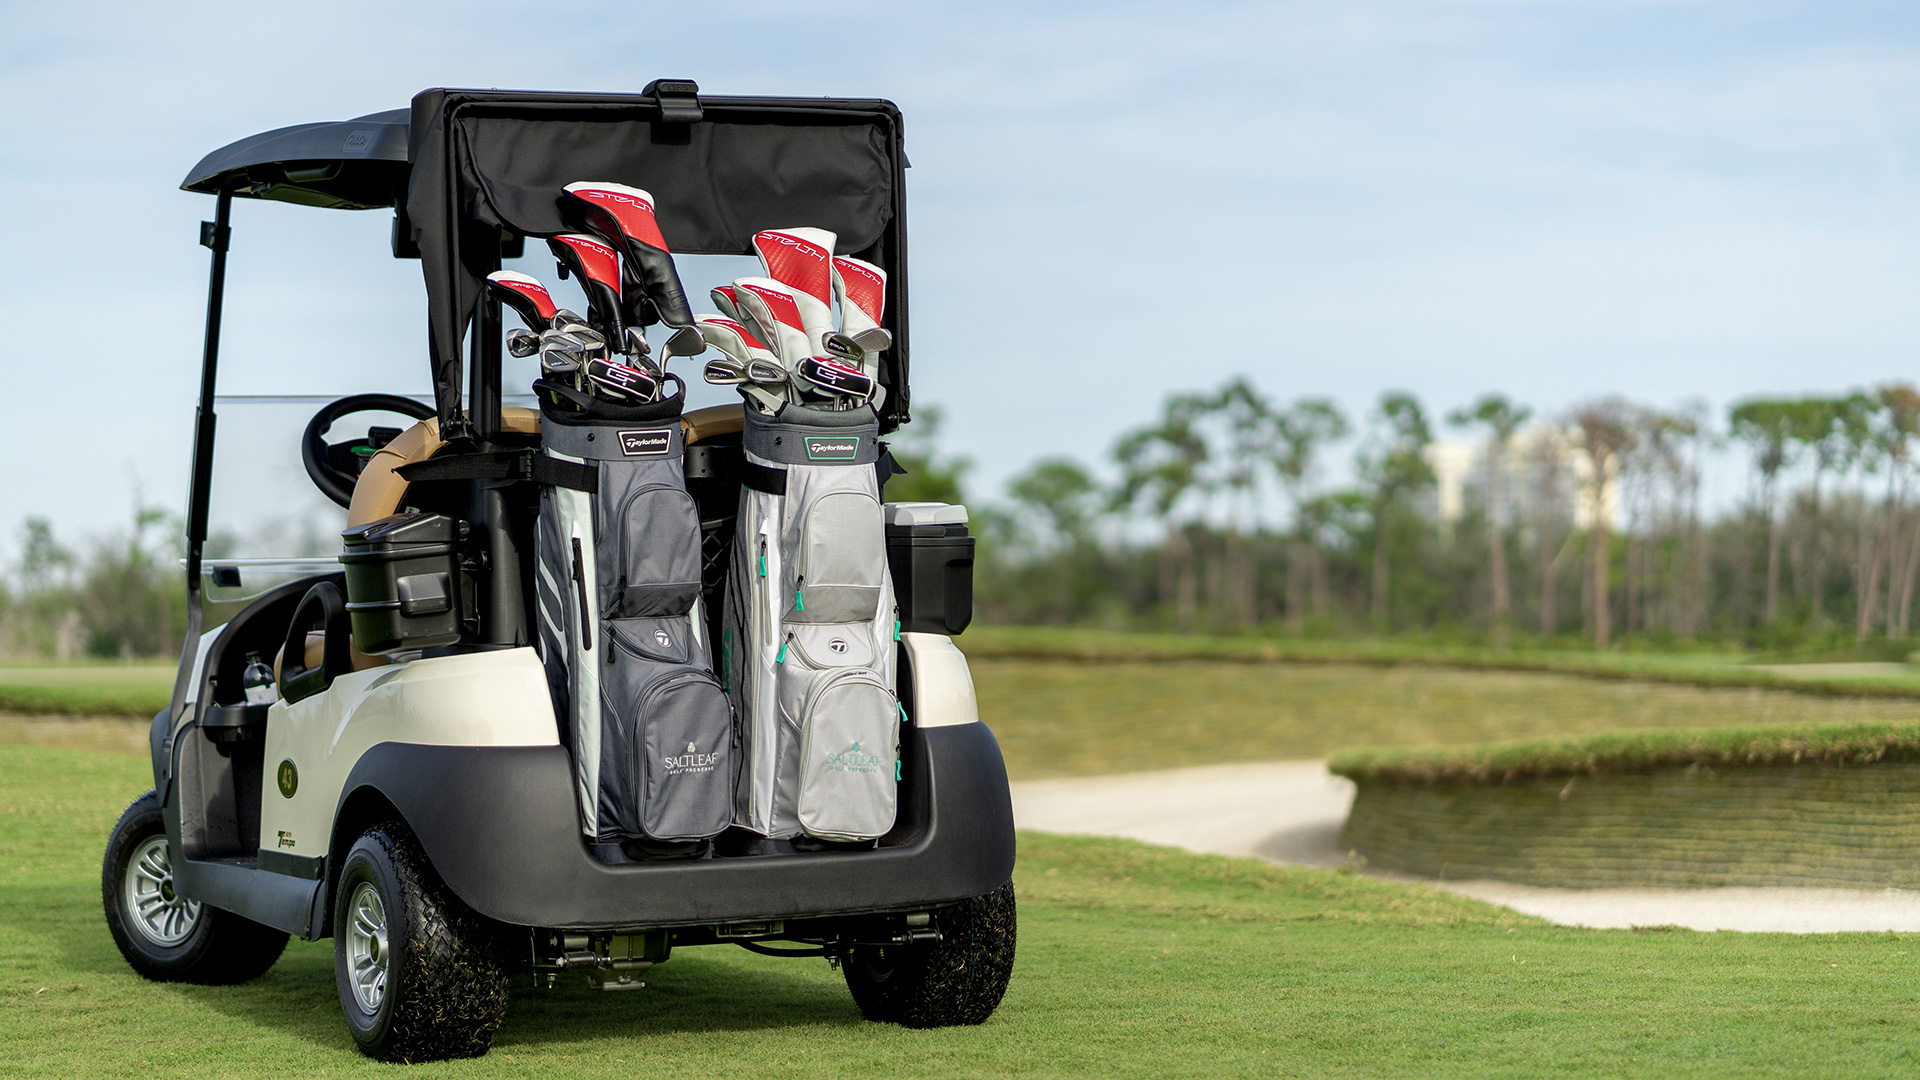 A golf cart equipped with golf clubs roams the championship golf course of Saltleaf Golf Preserve in Bonita Springs.